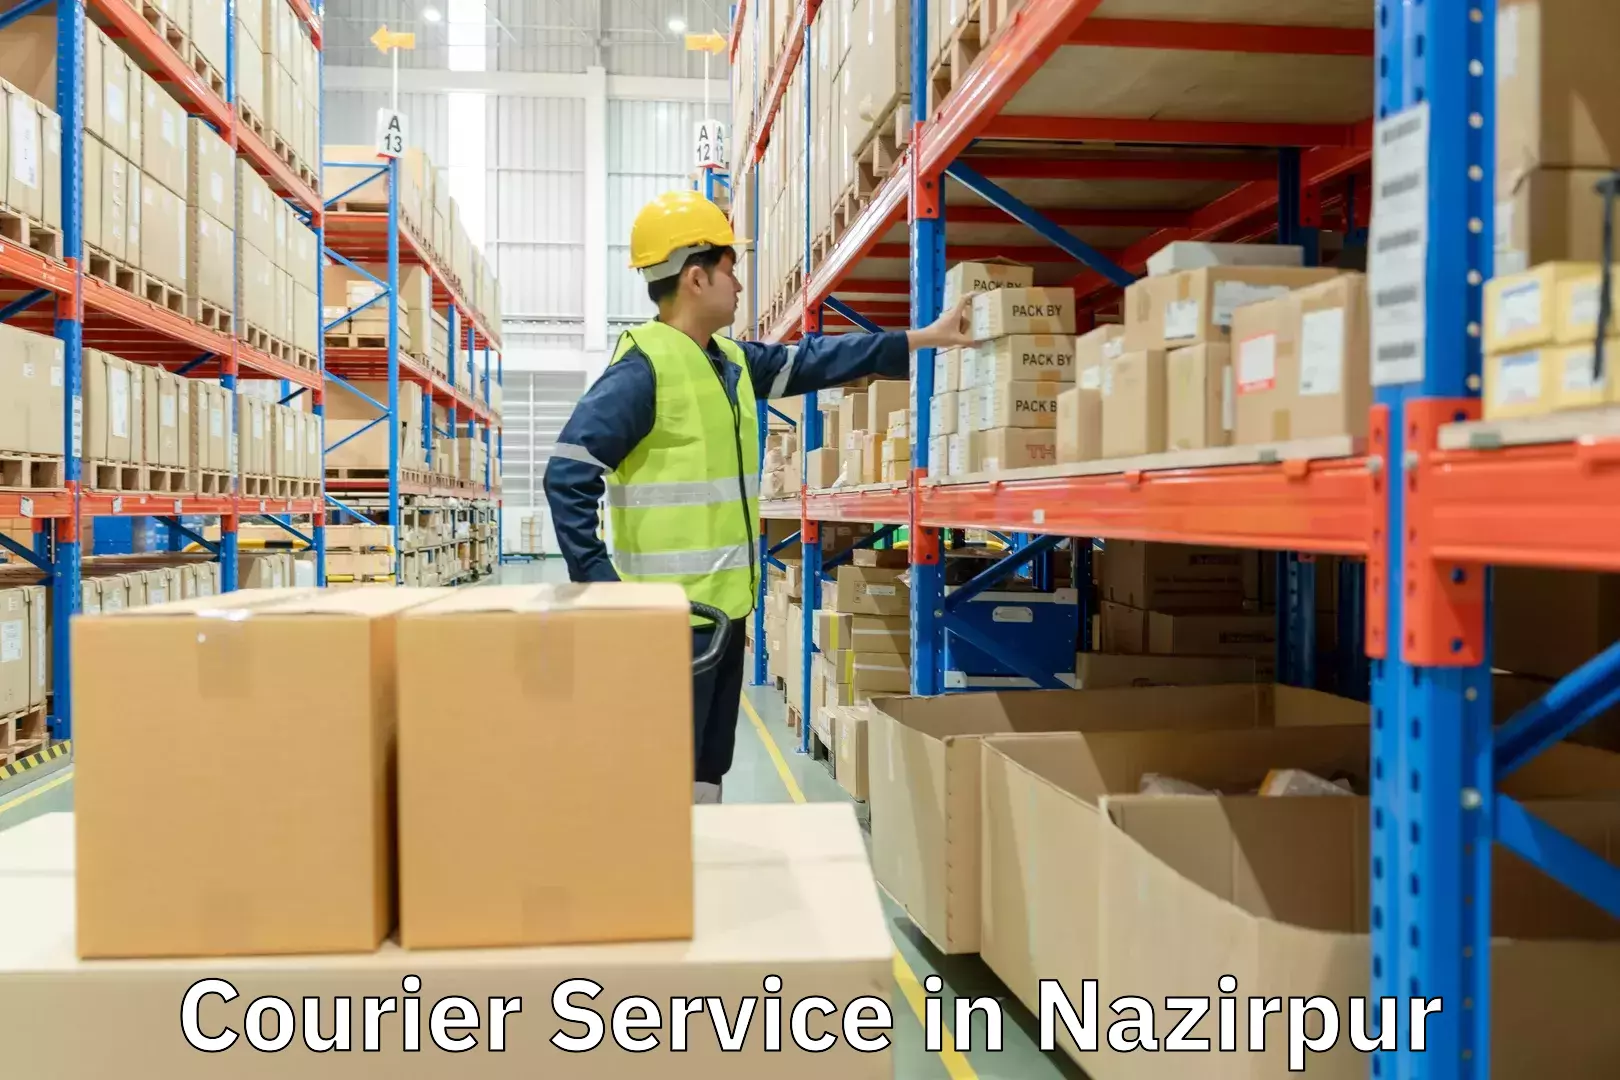 Efficient parcel tracking in Nazirpur